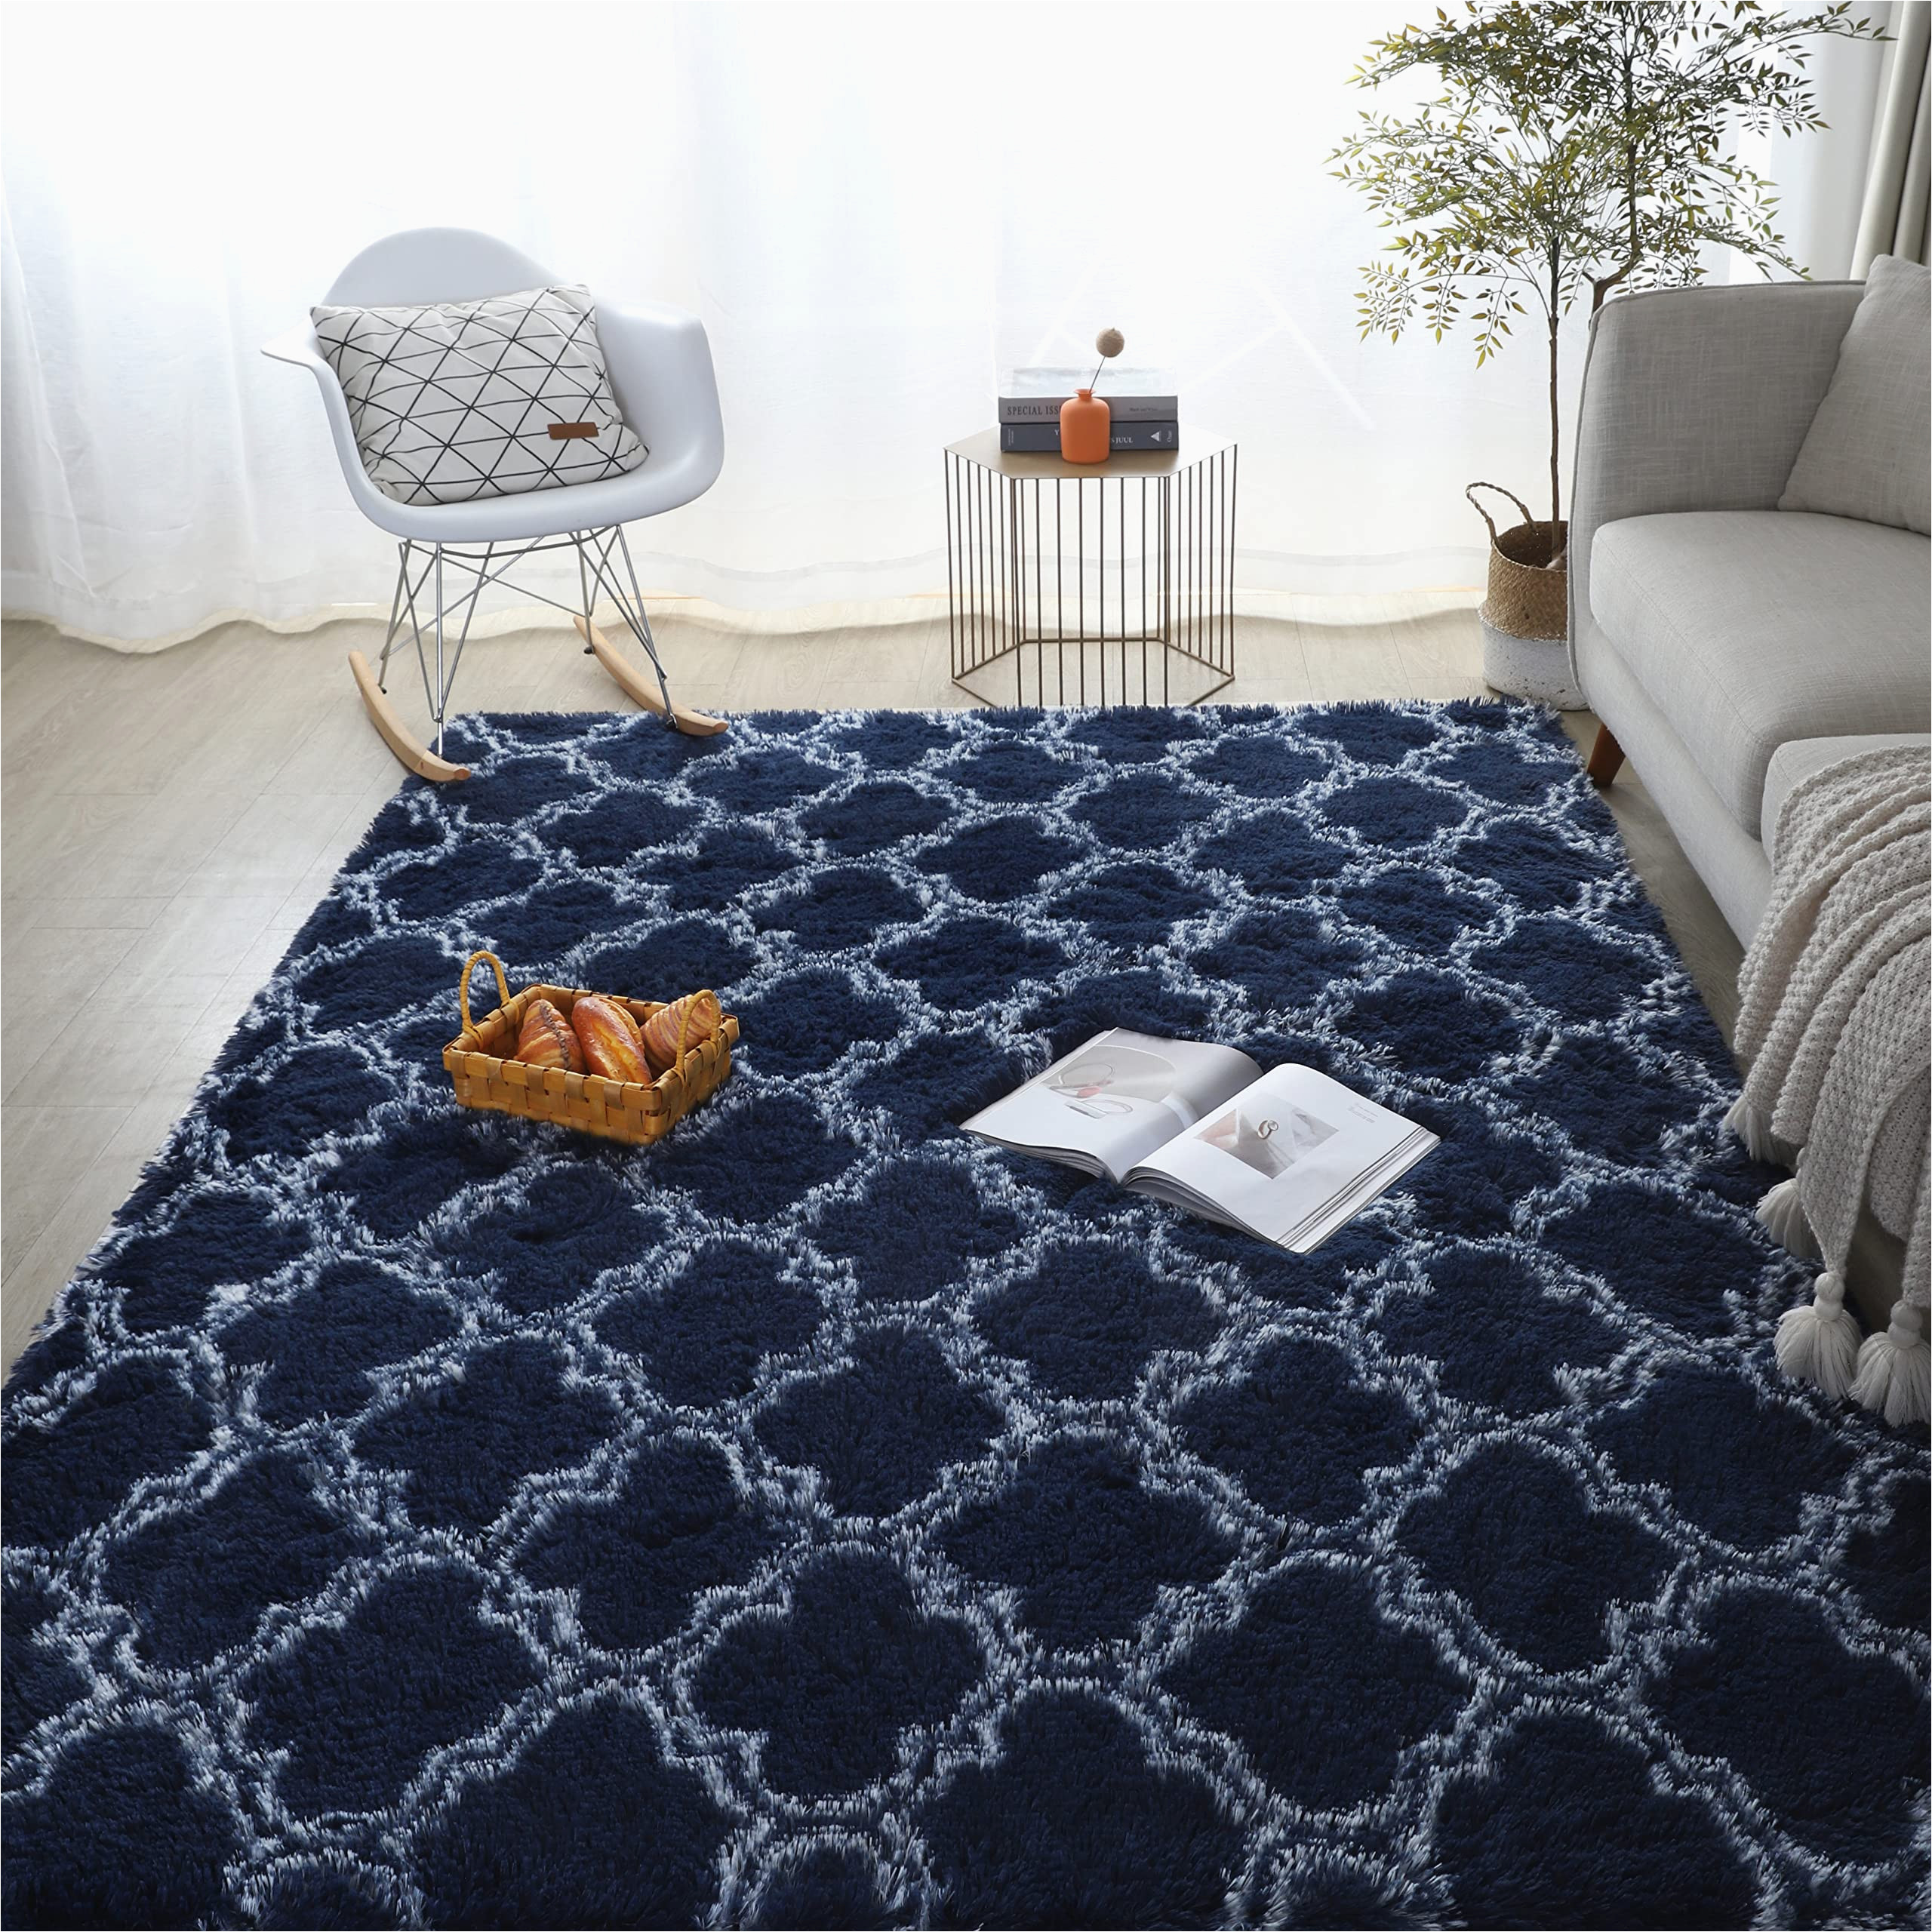 Modern area Rugs 4 X 6 4×6 Feet Navy soft area Rugs for Bedroom Living Room Shag area Rug Modern Indoor Plush Fluffy Carpets, soft and Comfy Carpet, Girls Kids Nursery (4×6 …